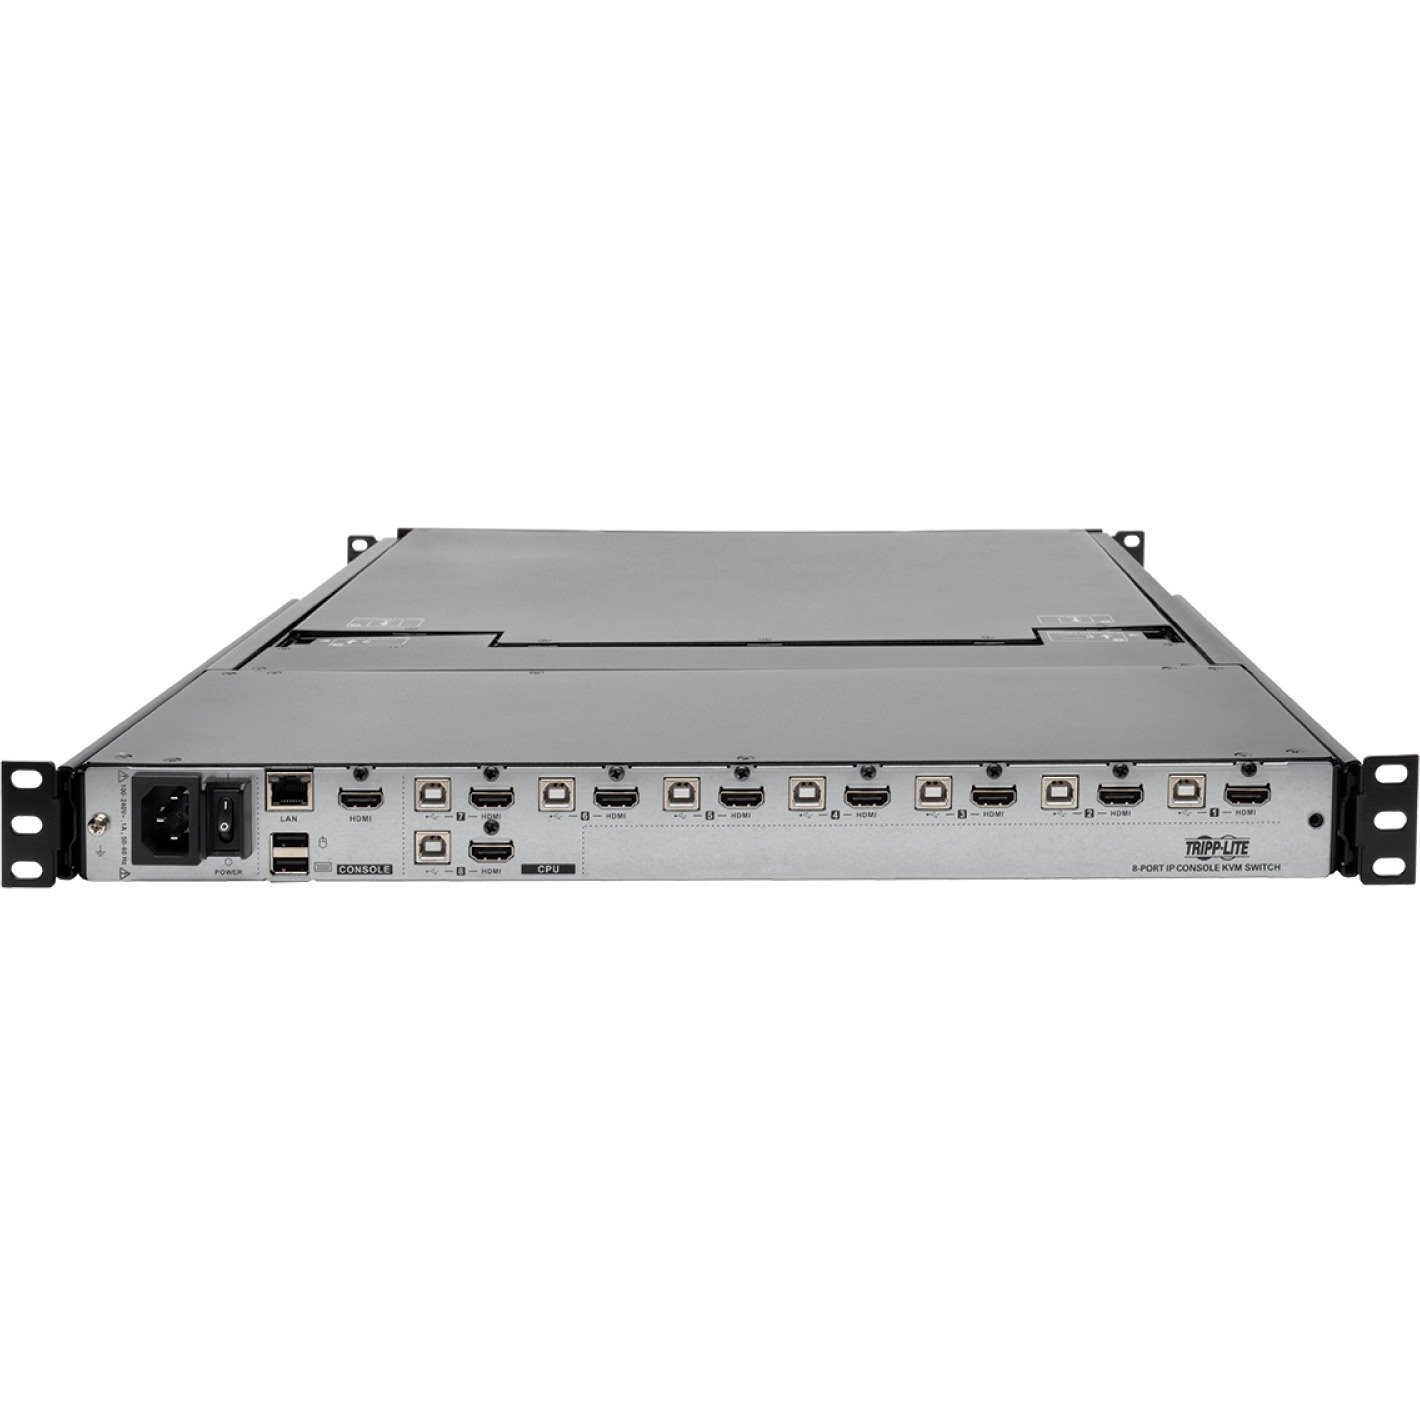 Tripp Lite by Eaton NetDirector 8-Port 1U Rack-Mount Console HDMI KVM Switch with 17 in. LCD and IP Remote Access, Dual Rail